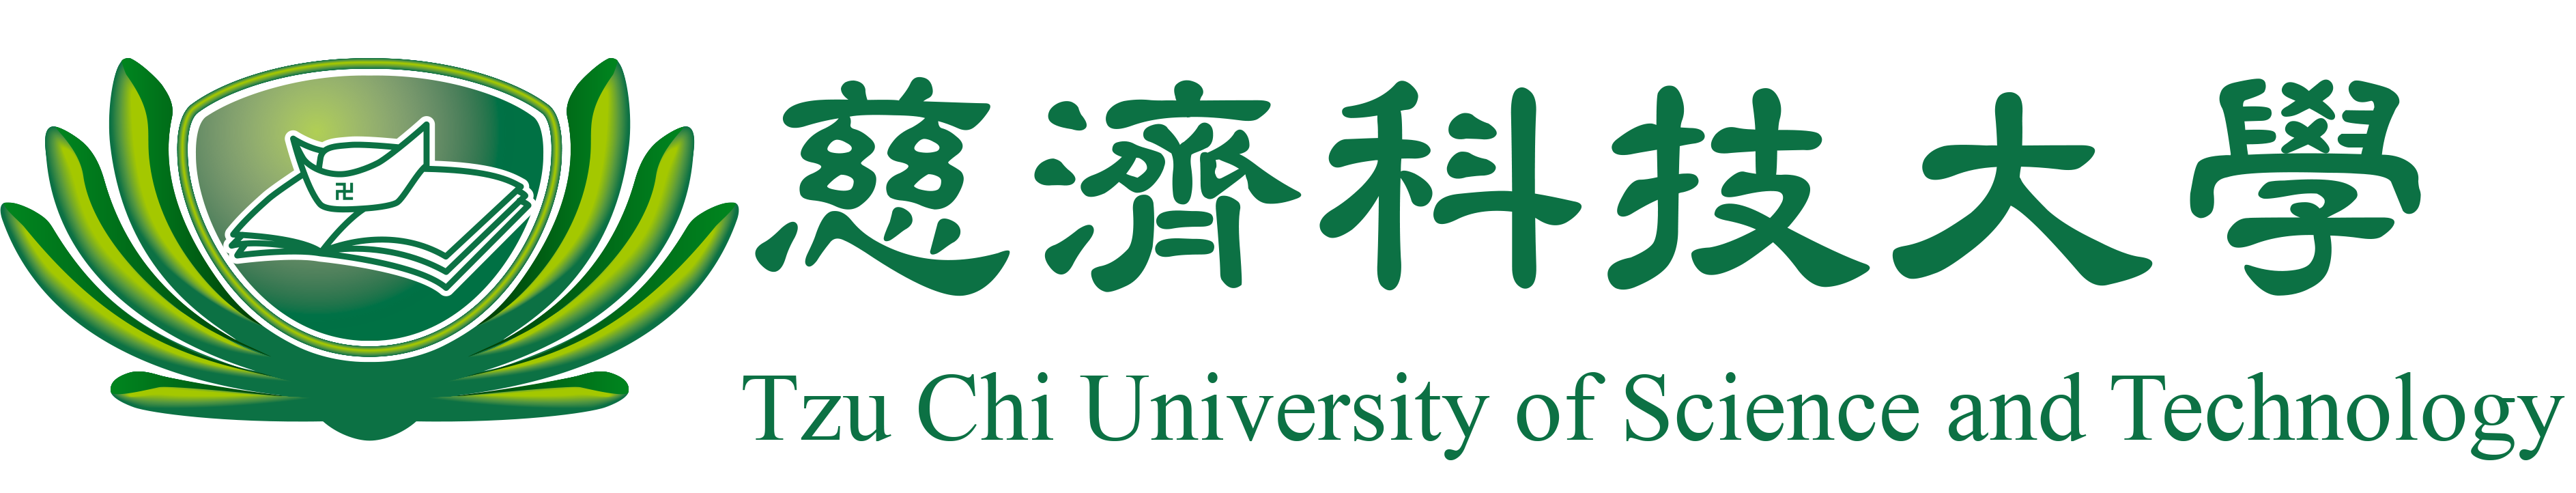 Tzu Chi University of Science and Technology